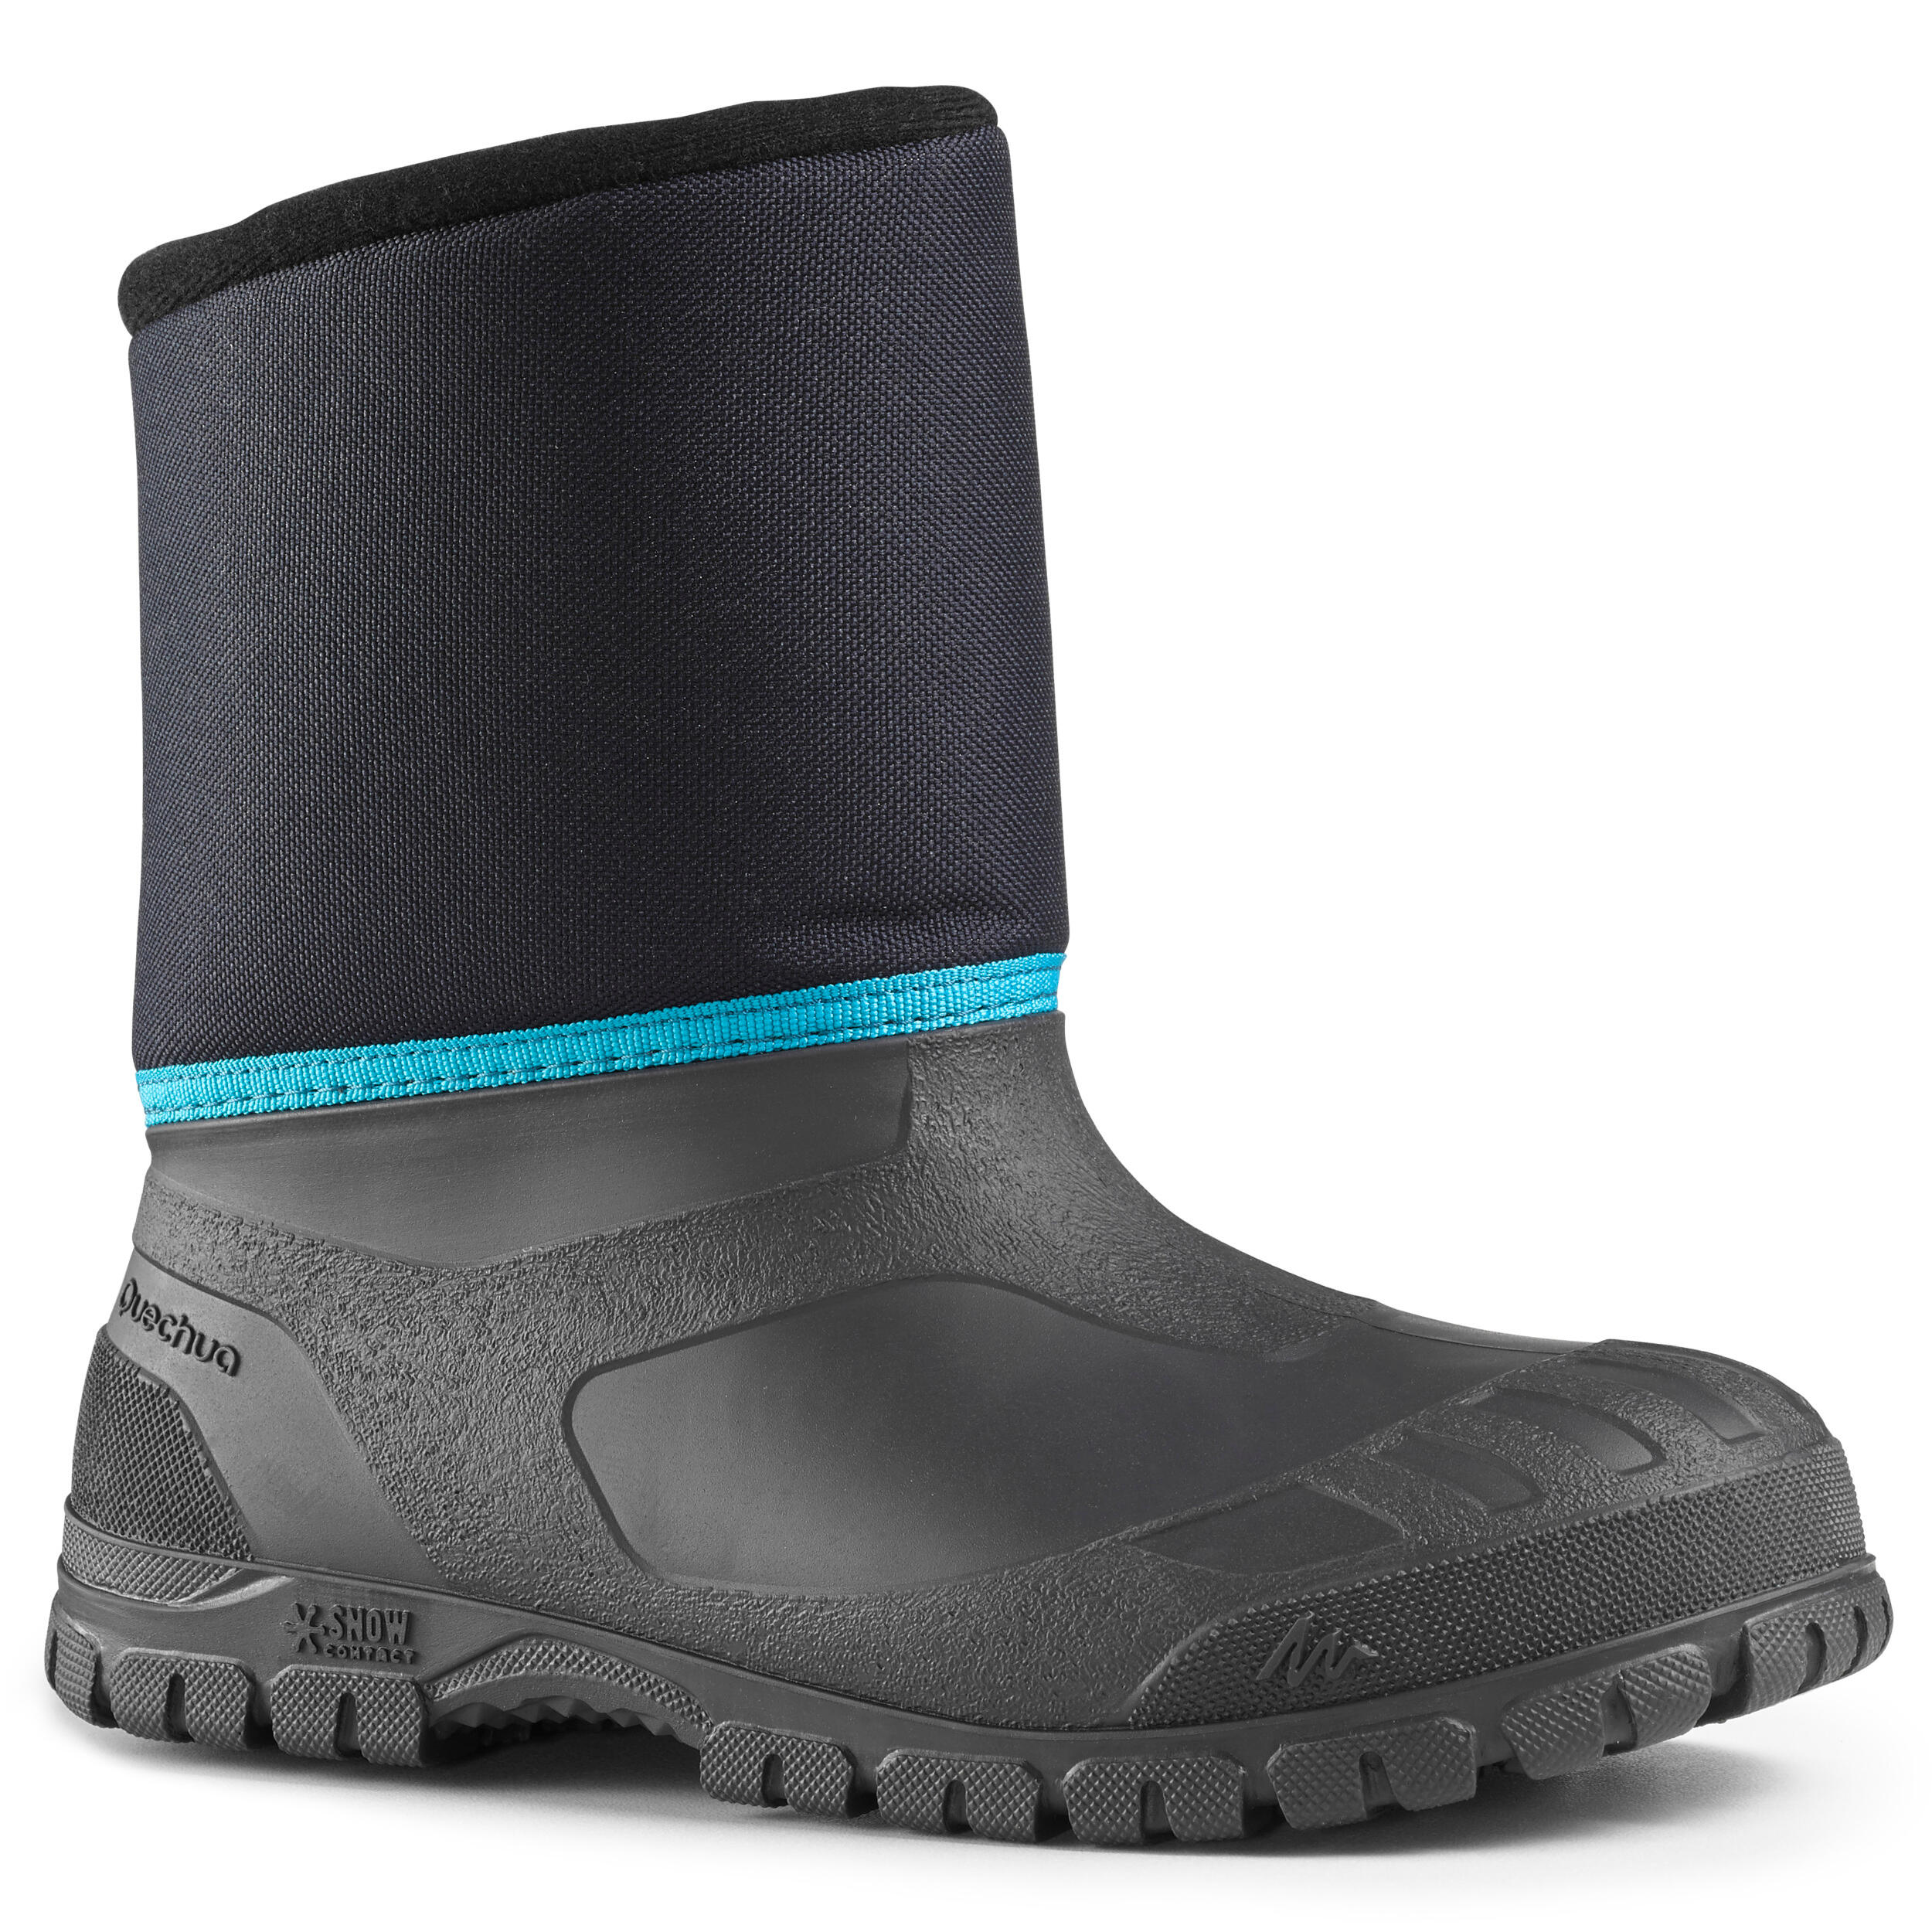 KIDS' WARM AND WATERPROOF SNOW BOOTS 